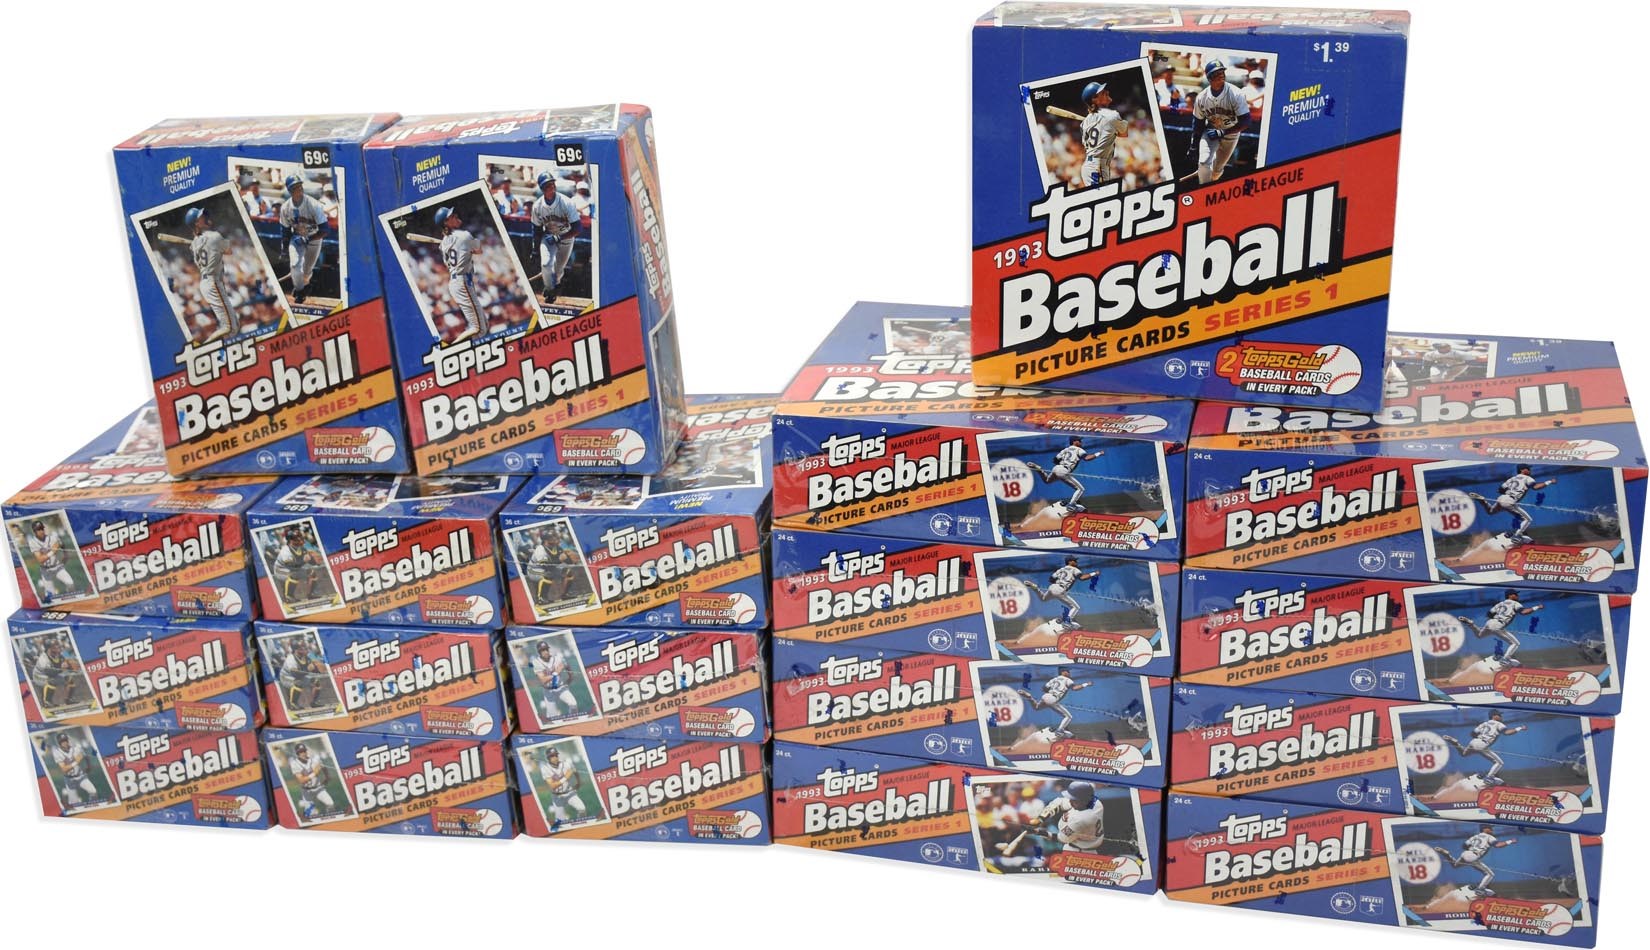 Unopened Wax Packs Boxes and Cases - 1993 Topps Baseball Series 1 Unopened Cello & Wax Boxes - Jeter Rookie Year (20)